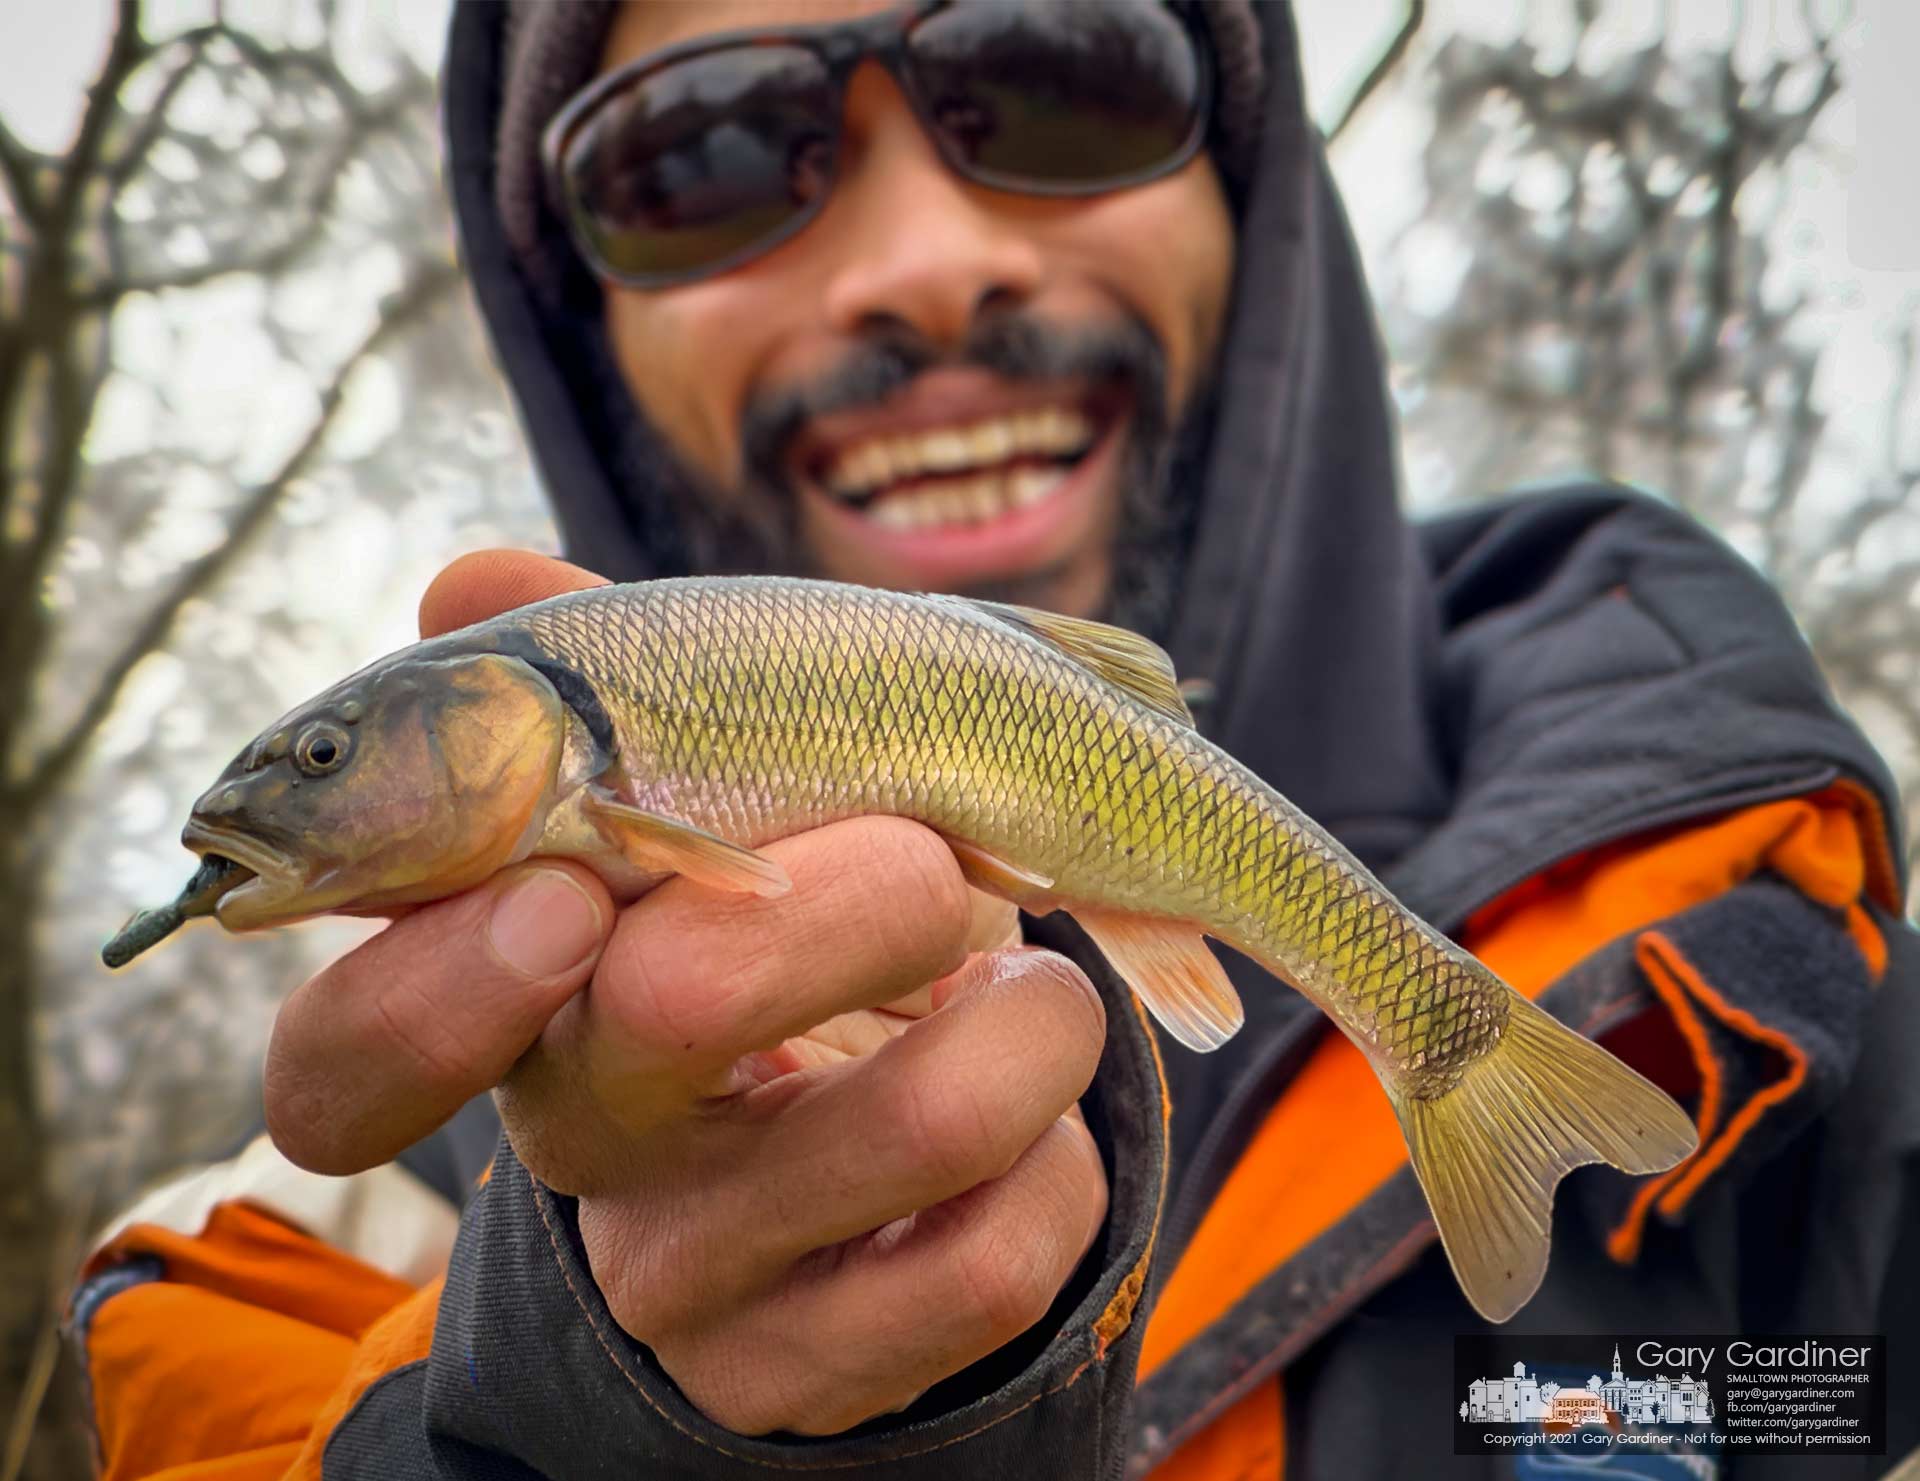 A fisherman smiles as he holds up the hand-sized creek chad he pulled from a holding pond near an office complex as his first fish of the year. My Final Photo for Jan. 8, 2021.